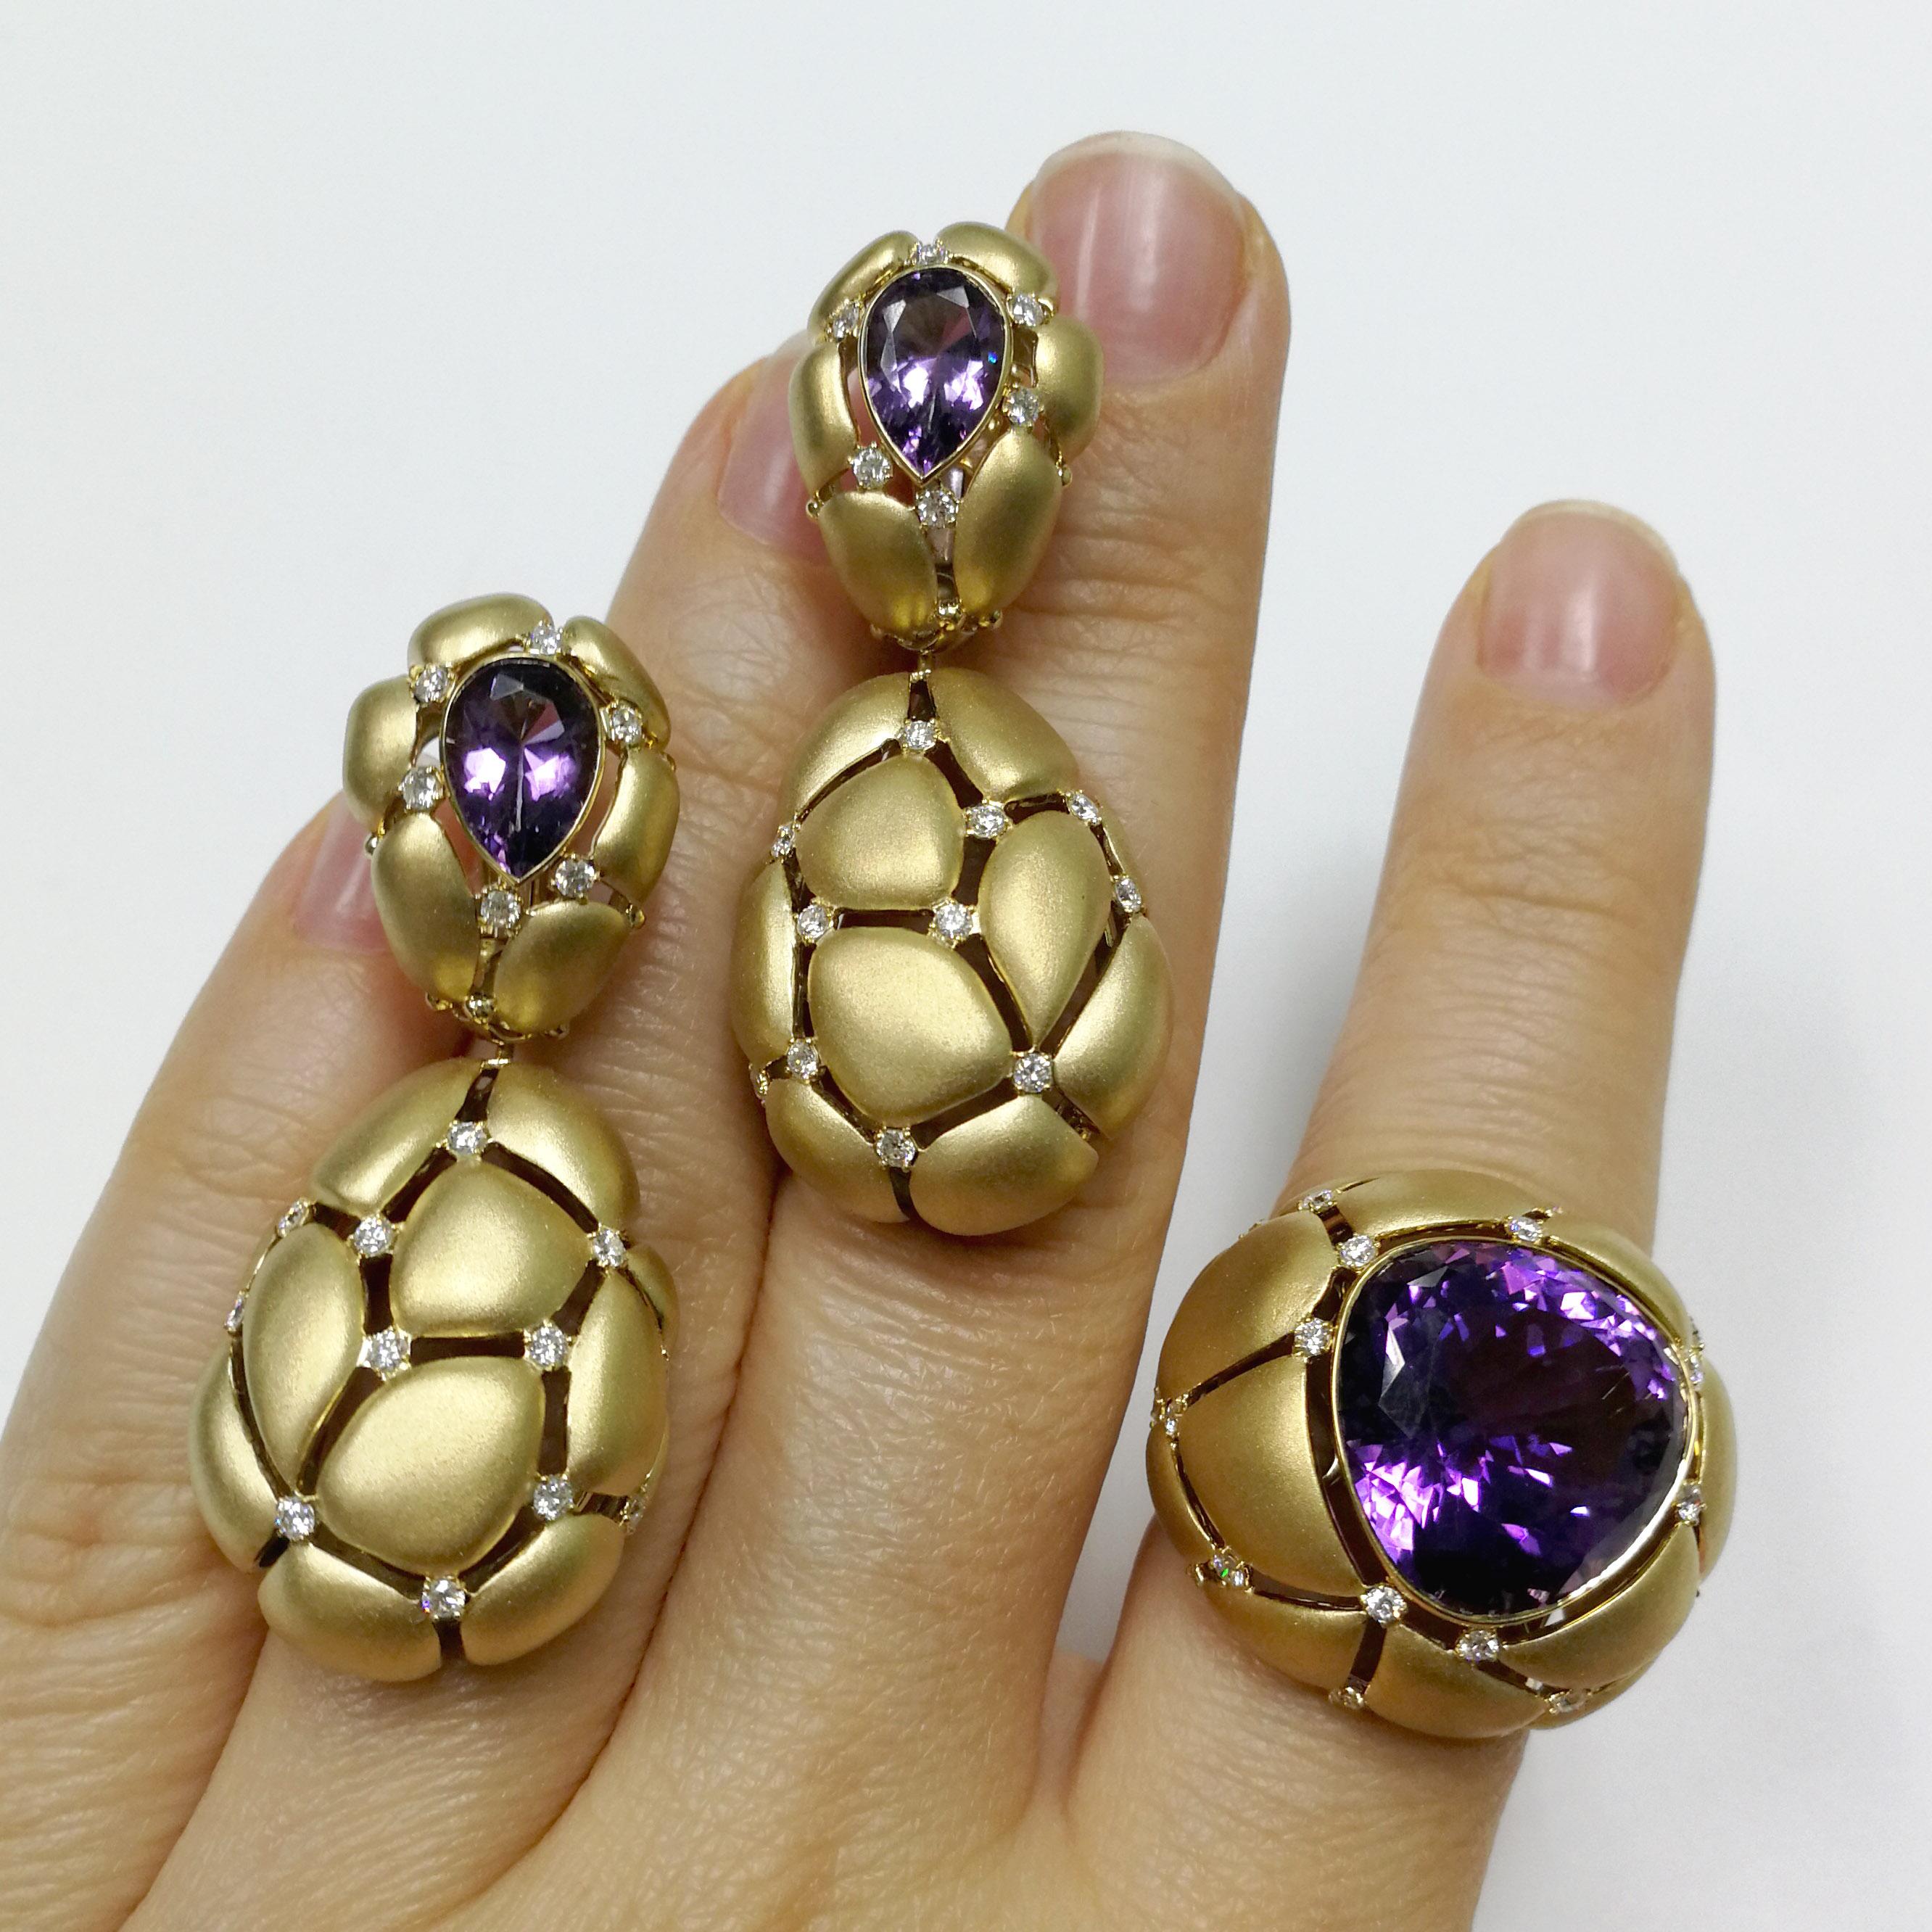 Amethyst White Diamonds 18 Karat Yellow Gold Suite
Take a look at this Suite! Looking at it, different associations can arise. For example, to someone it resembles a cotton flower. Others see it as cracked dry land in the desert. In any case, it is